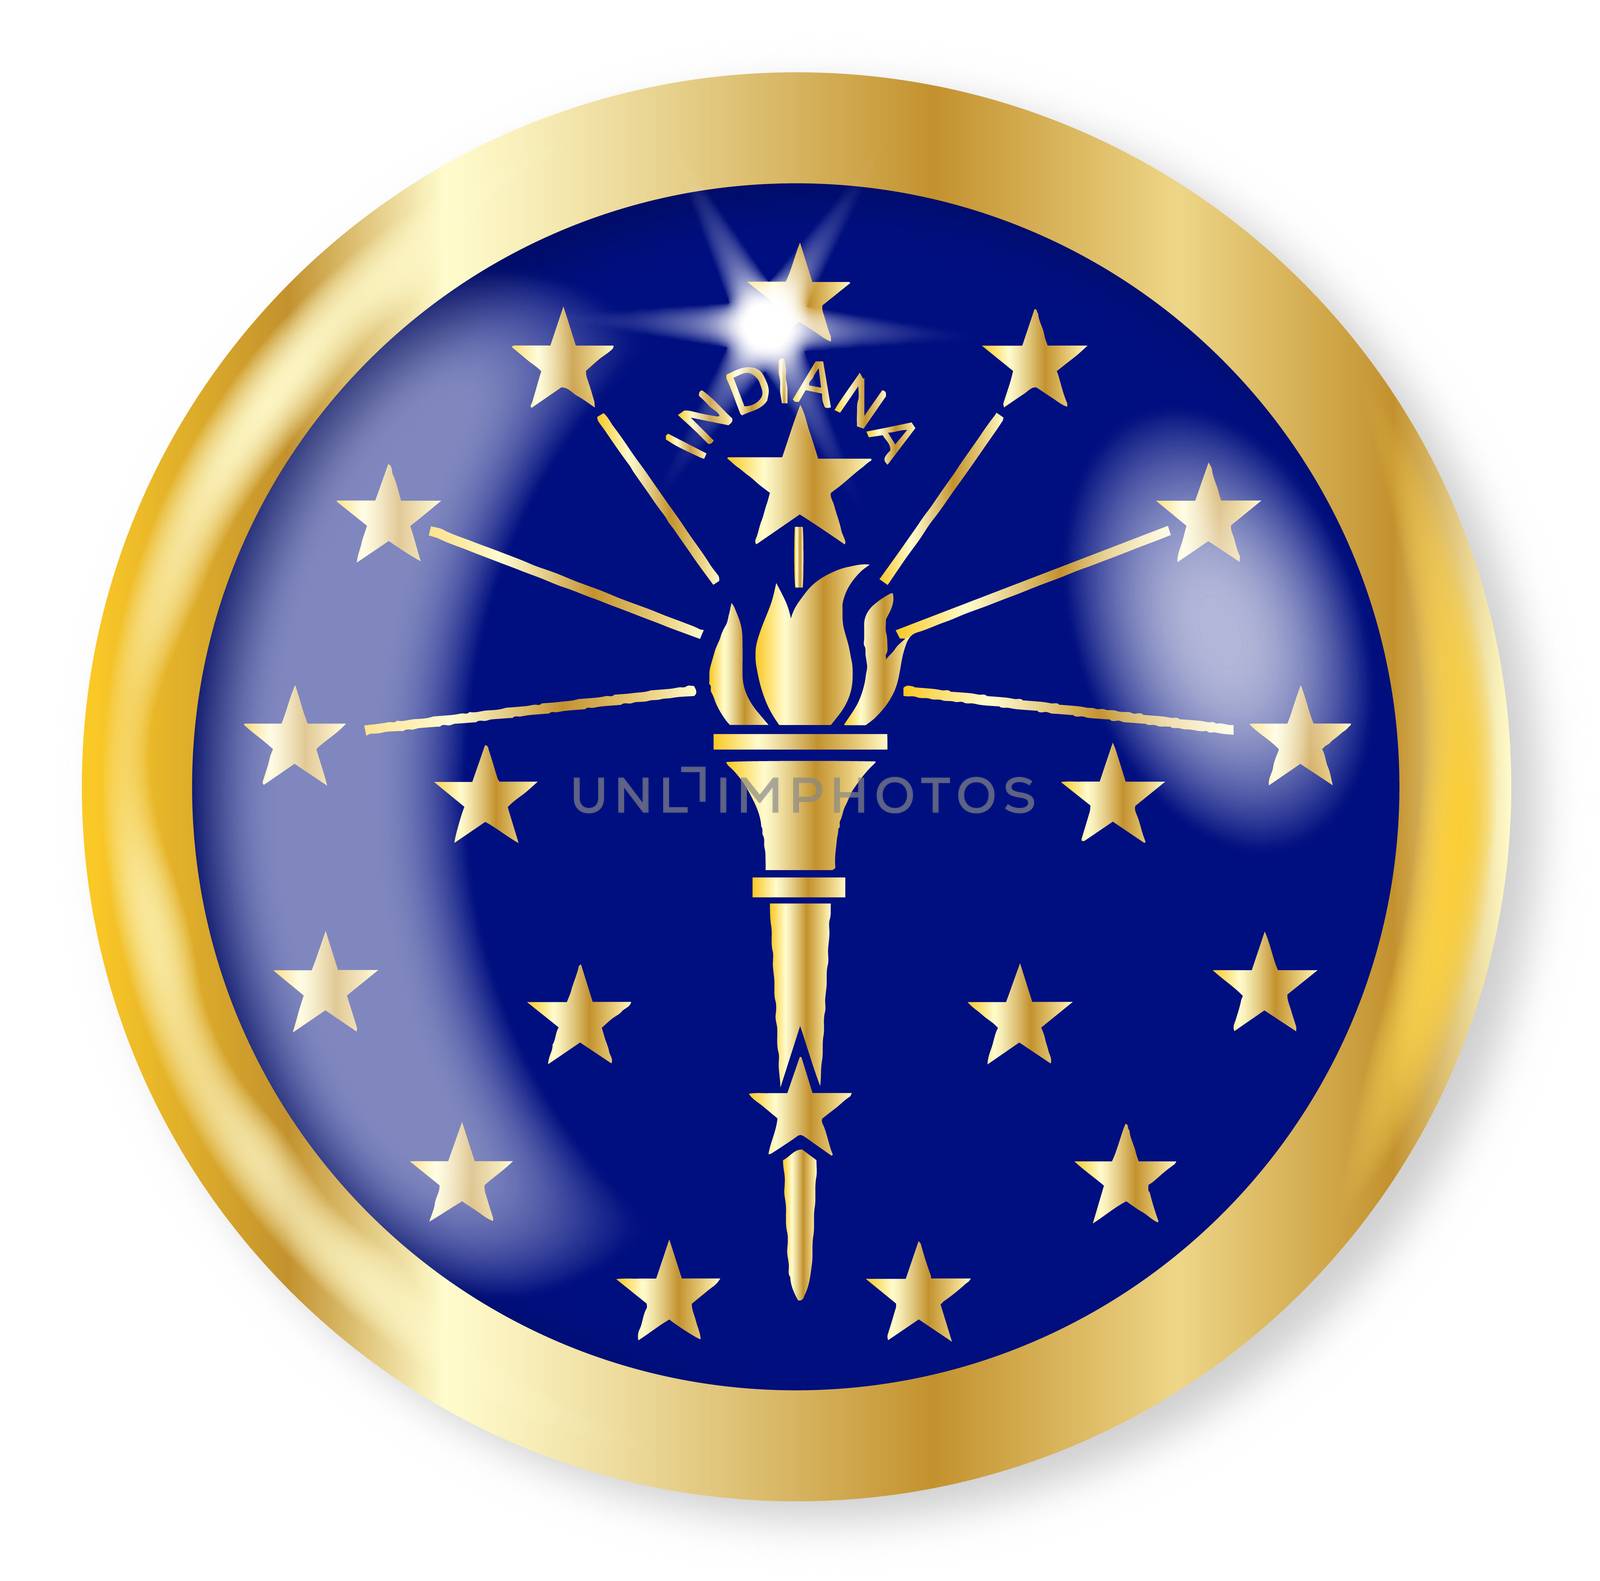 Indiana state flag button with a gold metal circular border over a white background